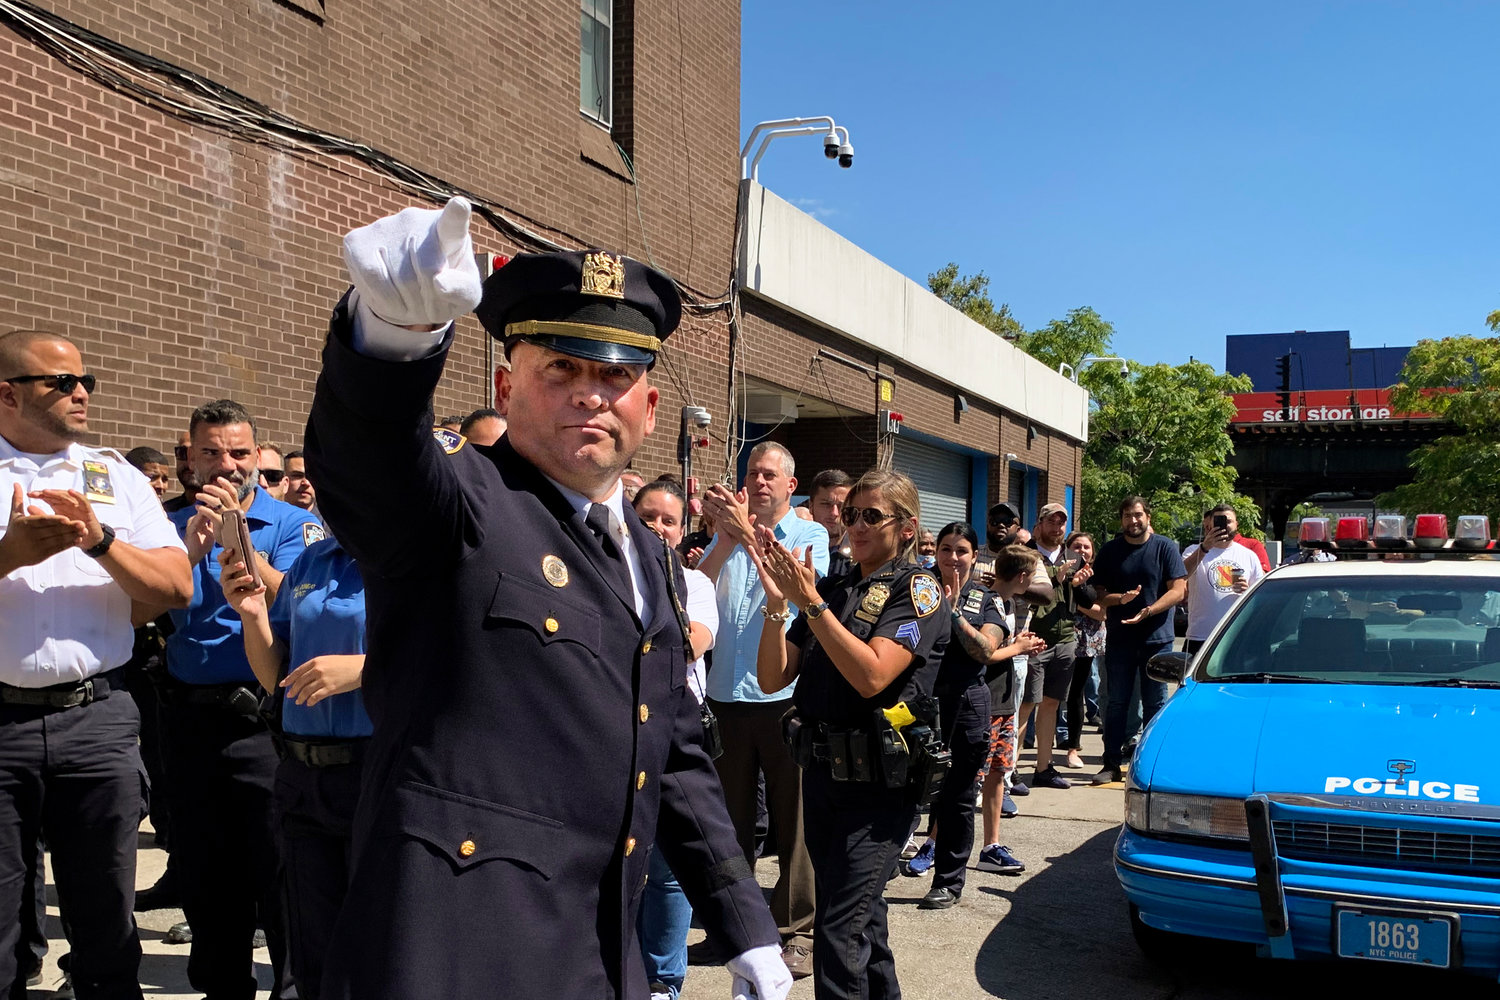 Capt. Emilio Melendez said good-bye to the 50th Precinct — and the New York Police Department overall — earlier this month after more than 30 years on the force. Part of the process for choosing Melendez’s replacement as precinct commander involves a nominating committee made up of community members tasked with interviewing applicants.